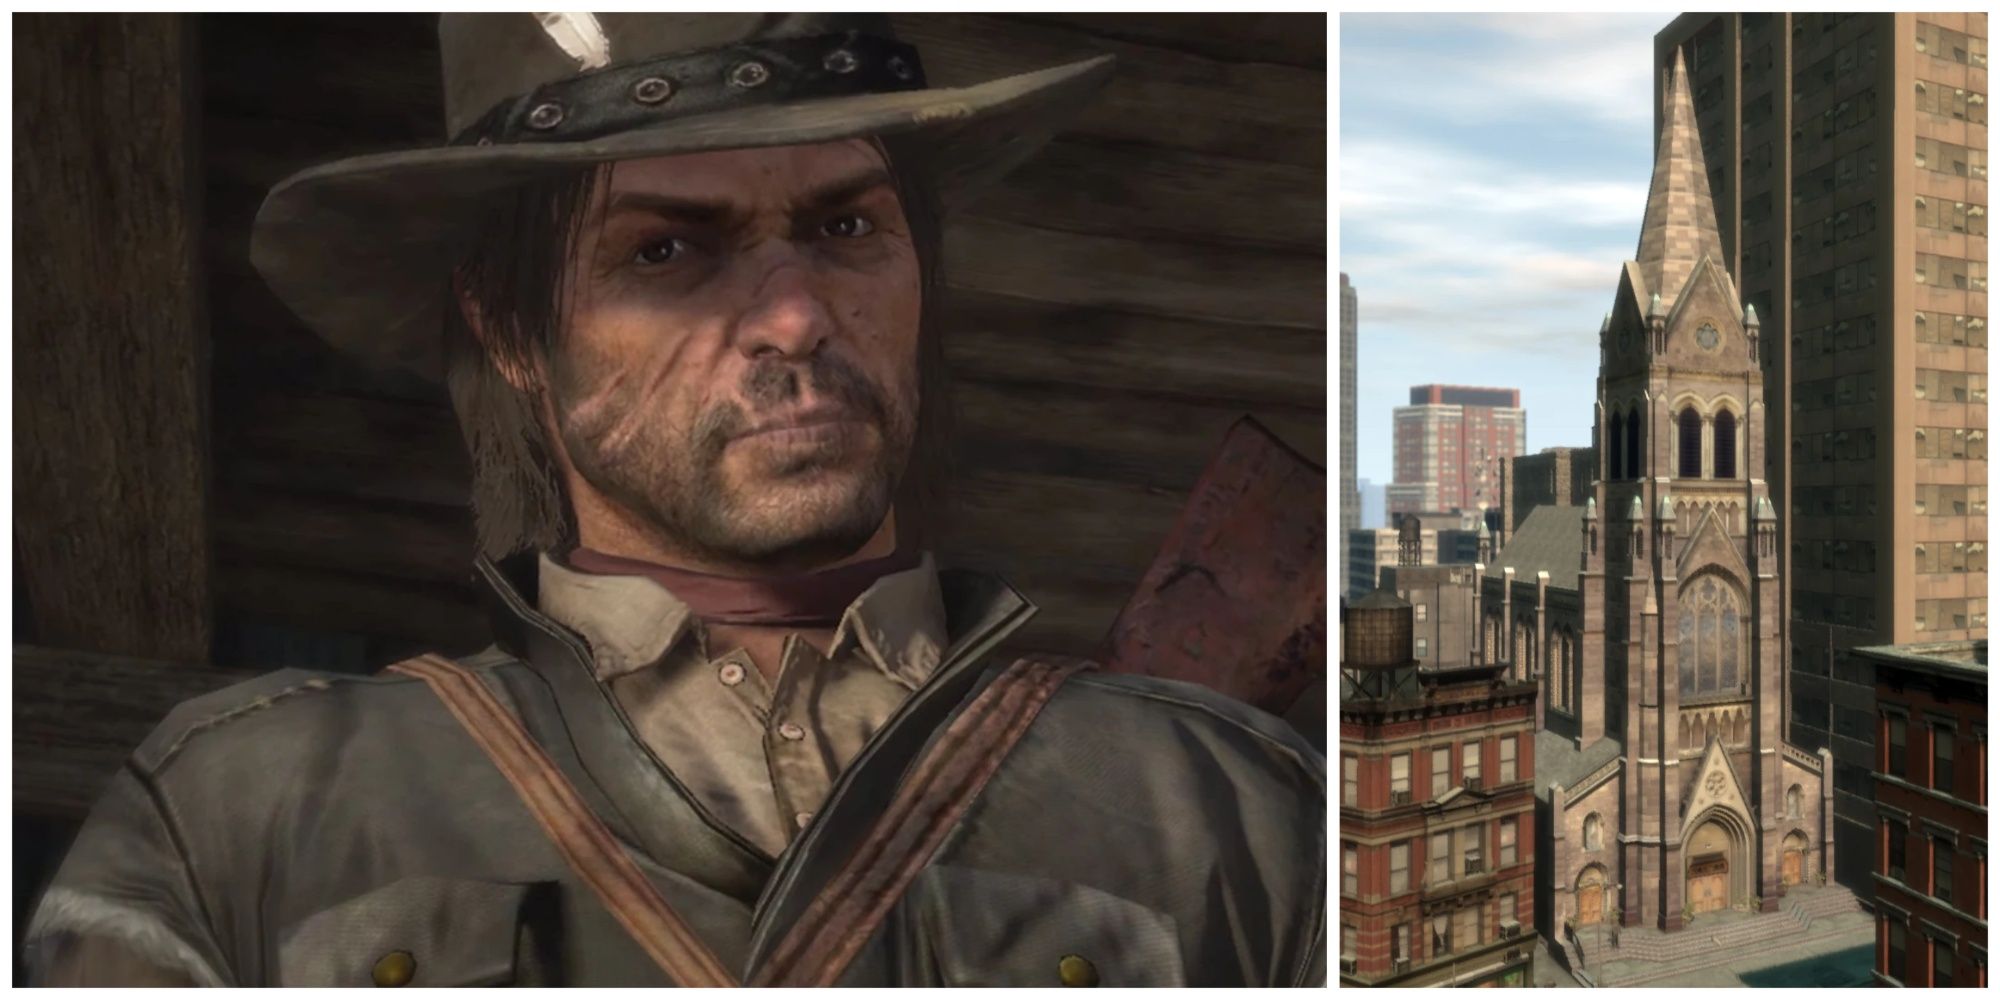 Collage featuring John Marston from Red Dead Redemption (left) and the wedding chapel from Grand Theft Auto 4 (right)